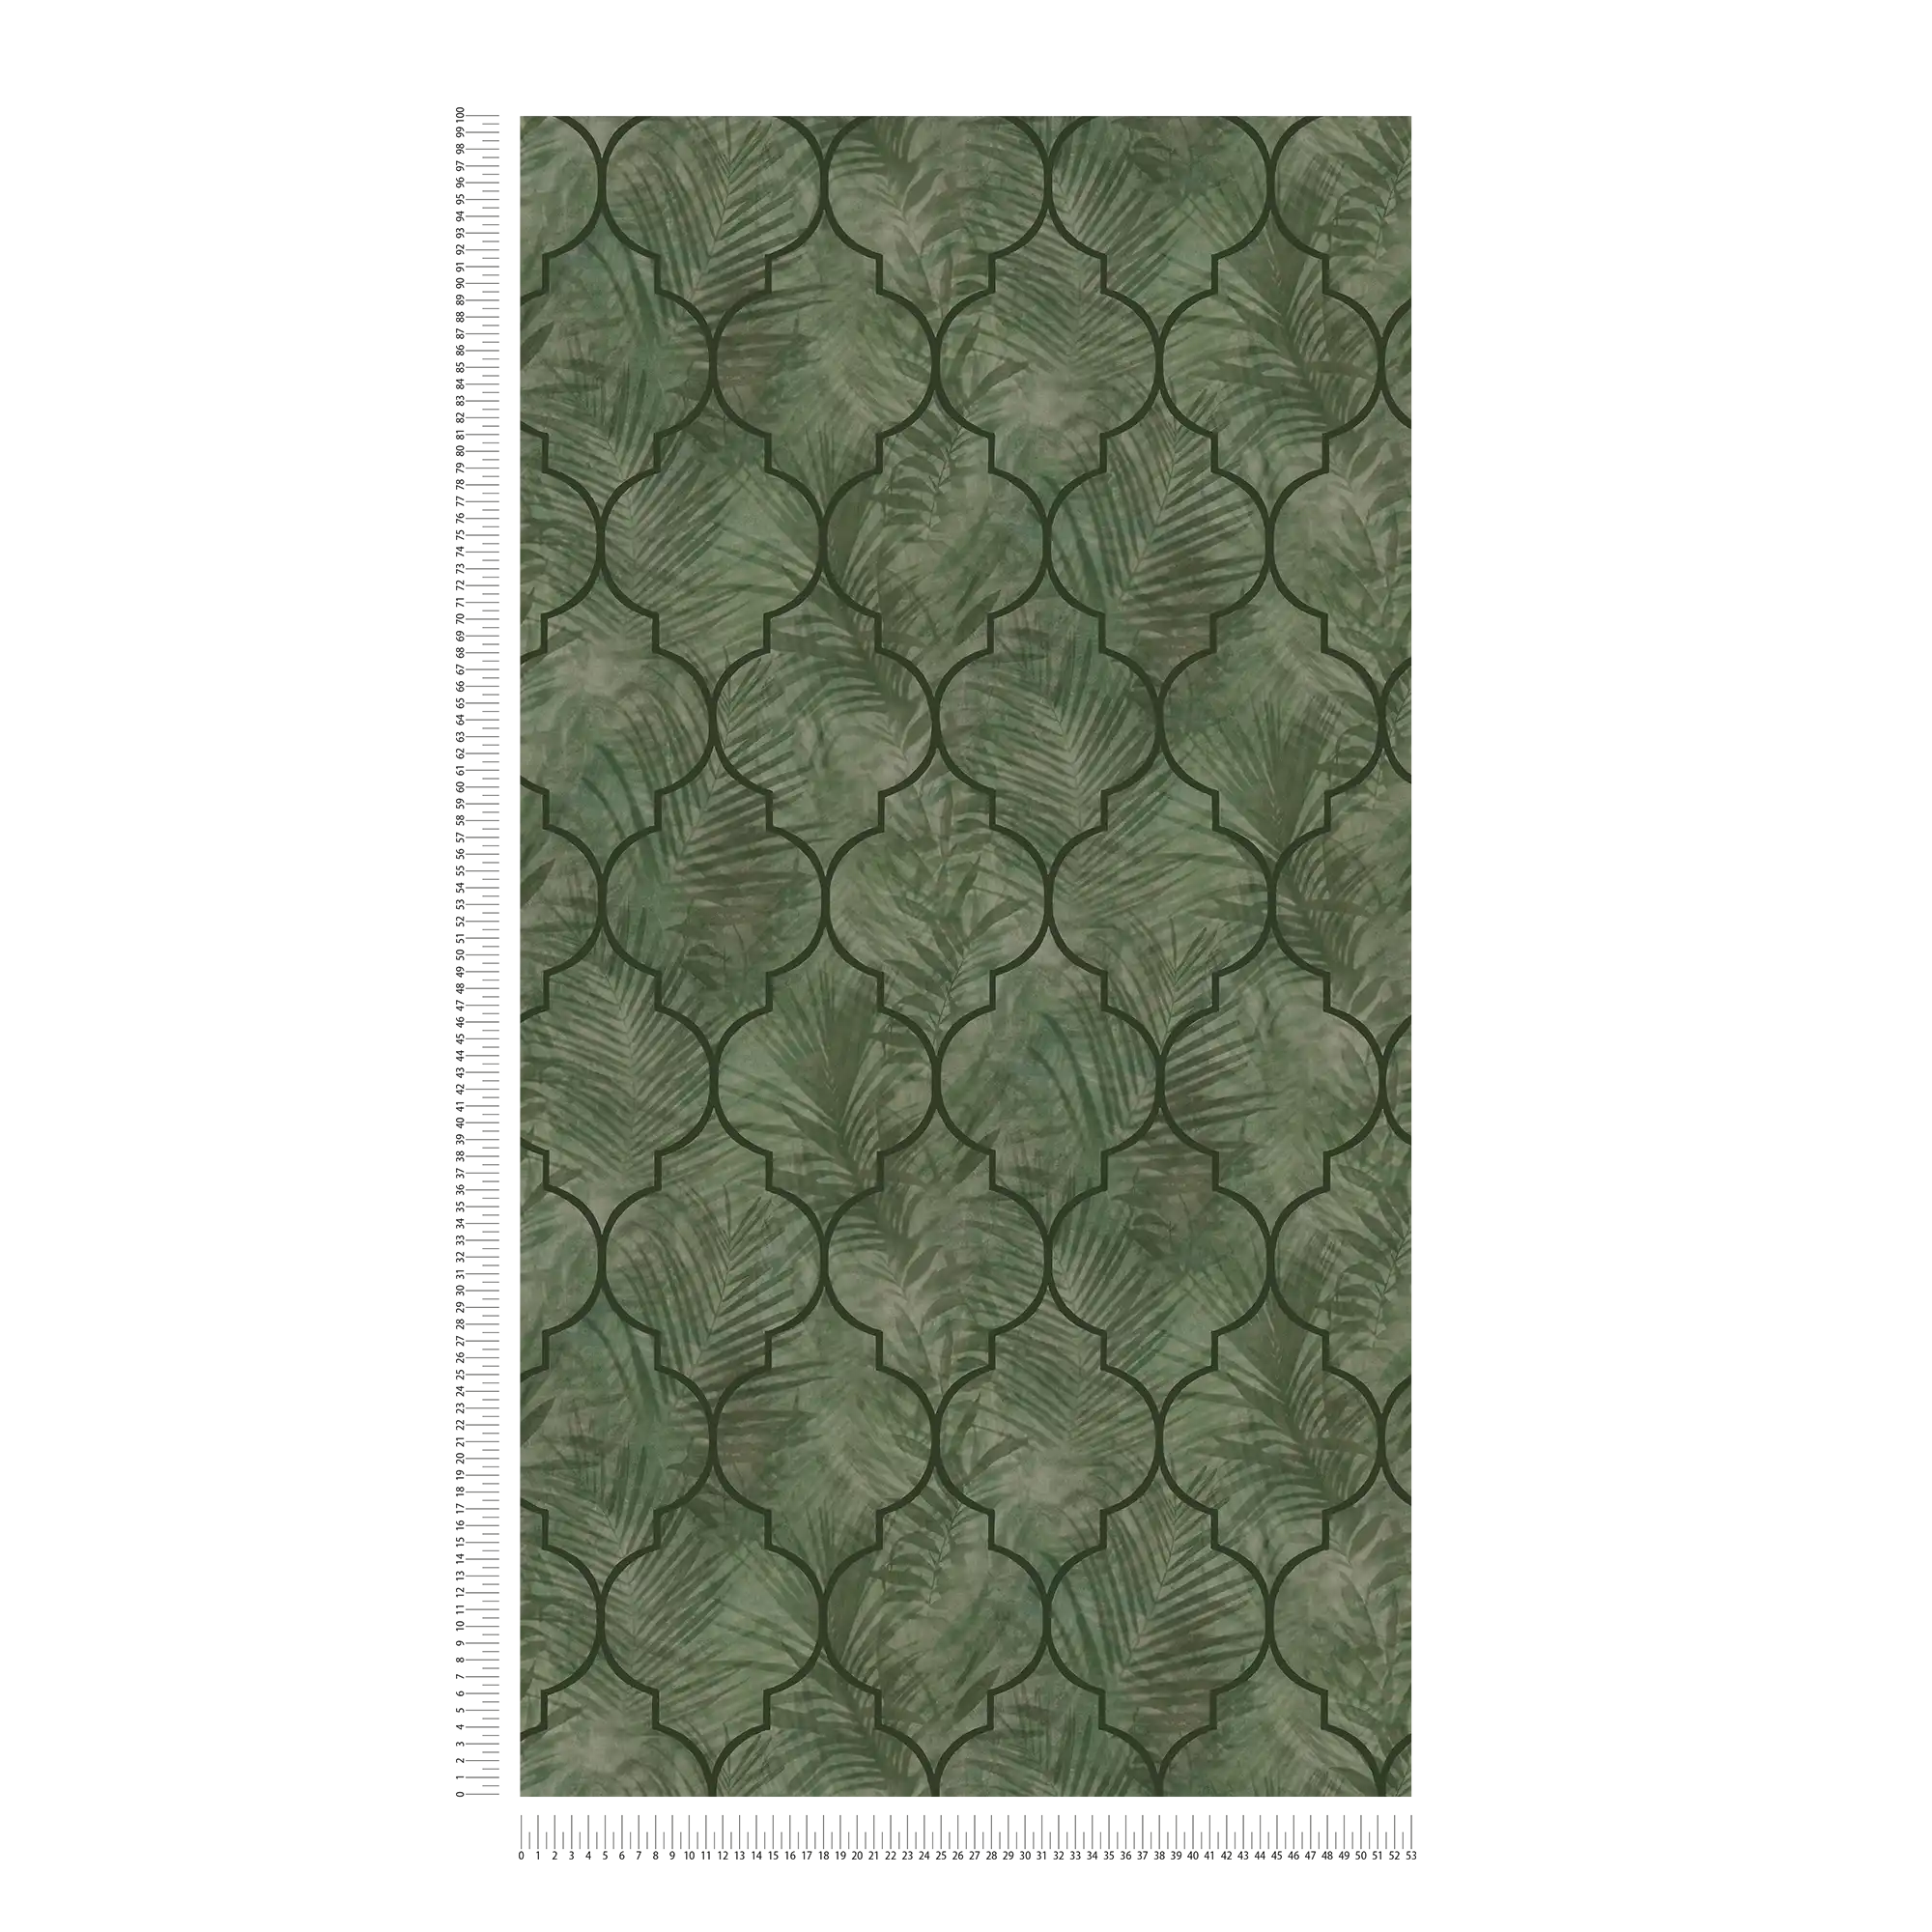             Non-woven wallpaper with leaf pattern on tile look - green
        